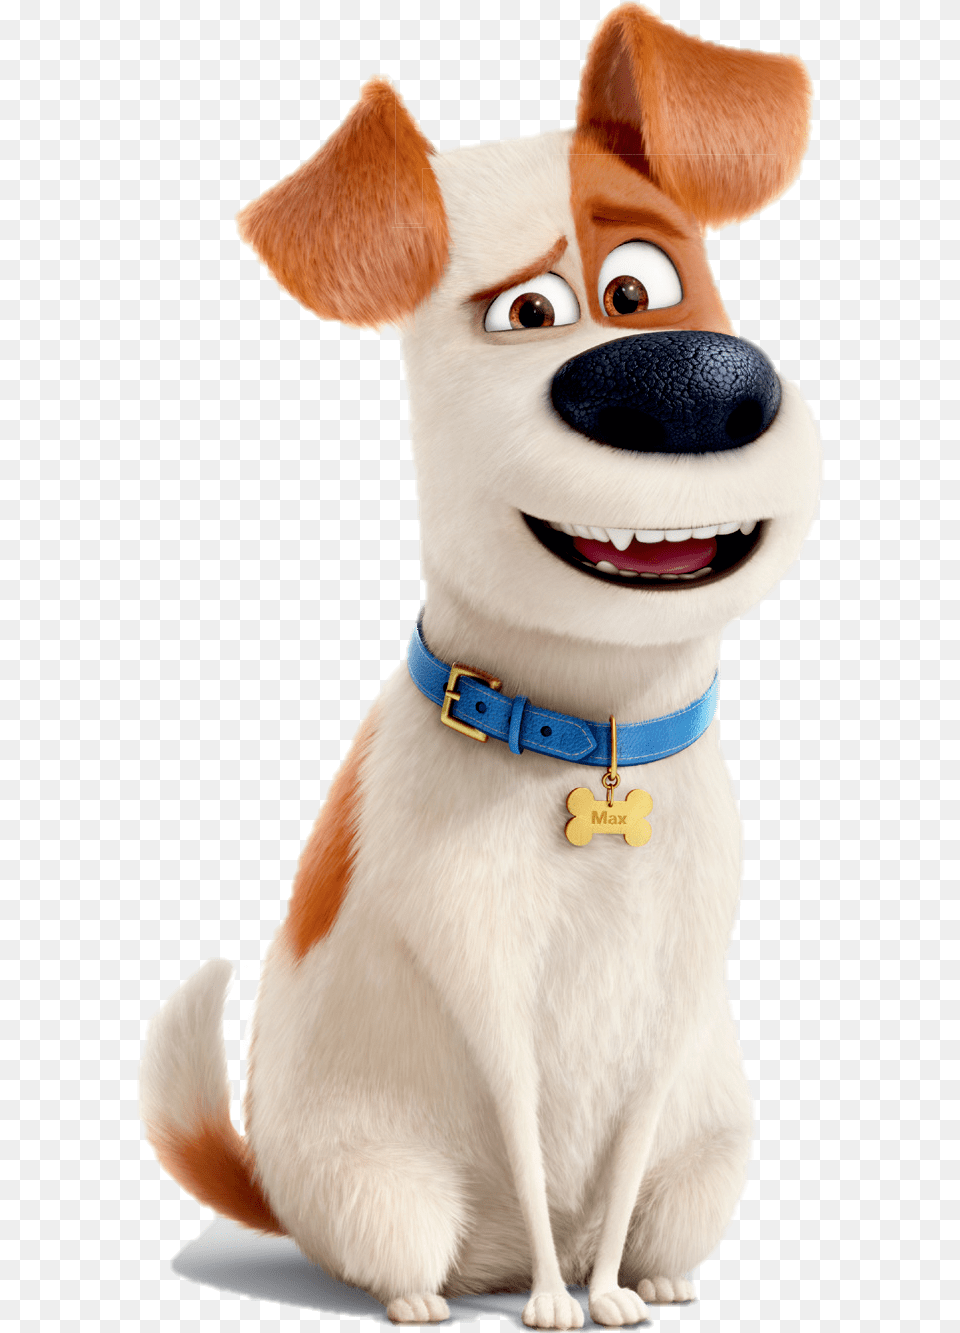 Dog Image Max From Secret Life Of Pets, Toy, Accessories Free Png